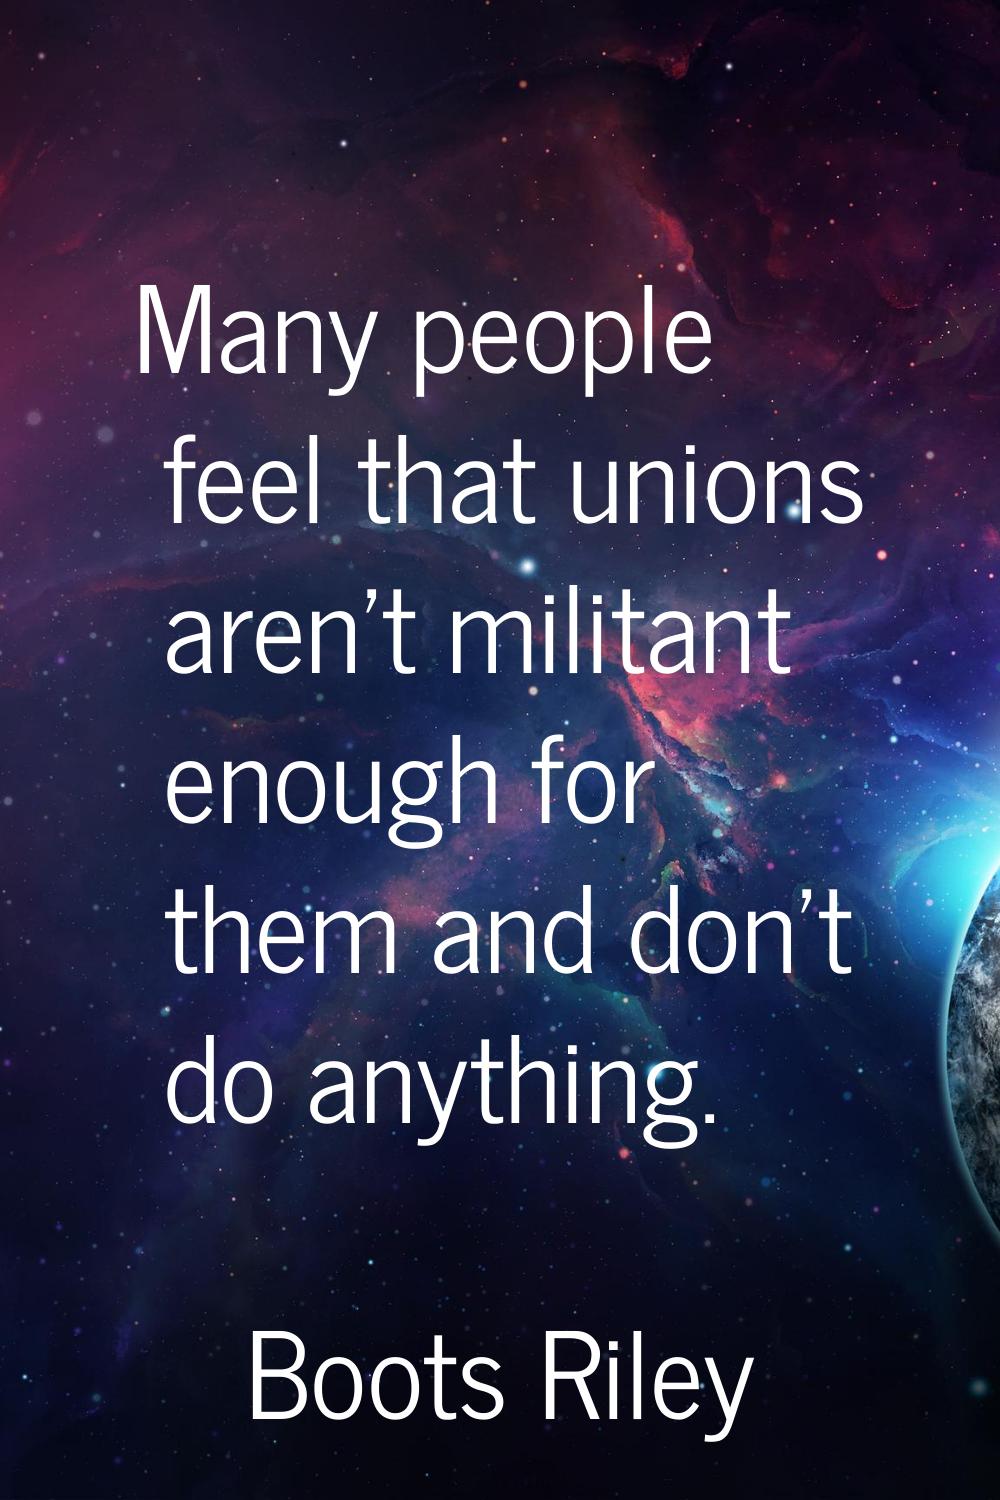 Many people feel that unions aren't militant enough for them and don't do anything.